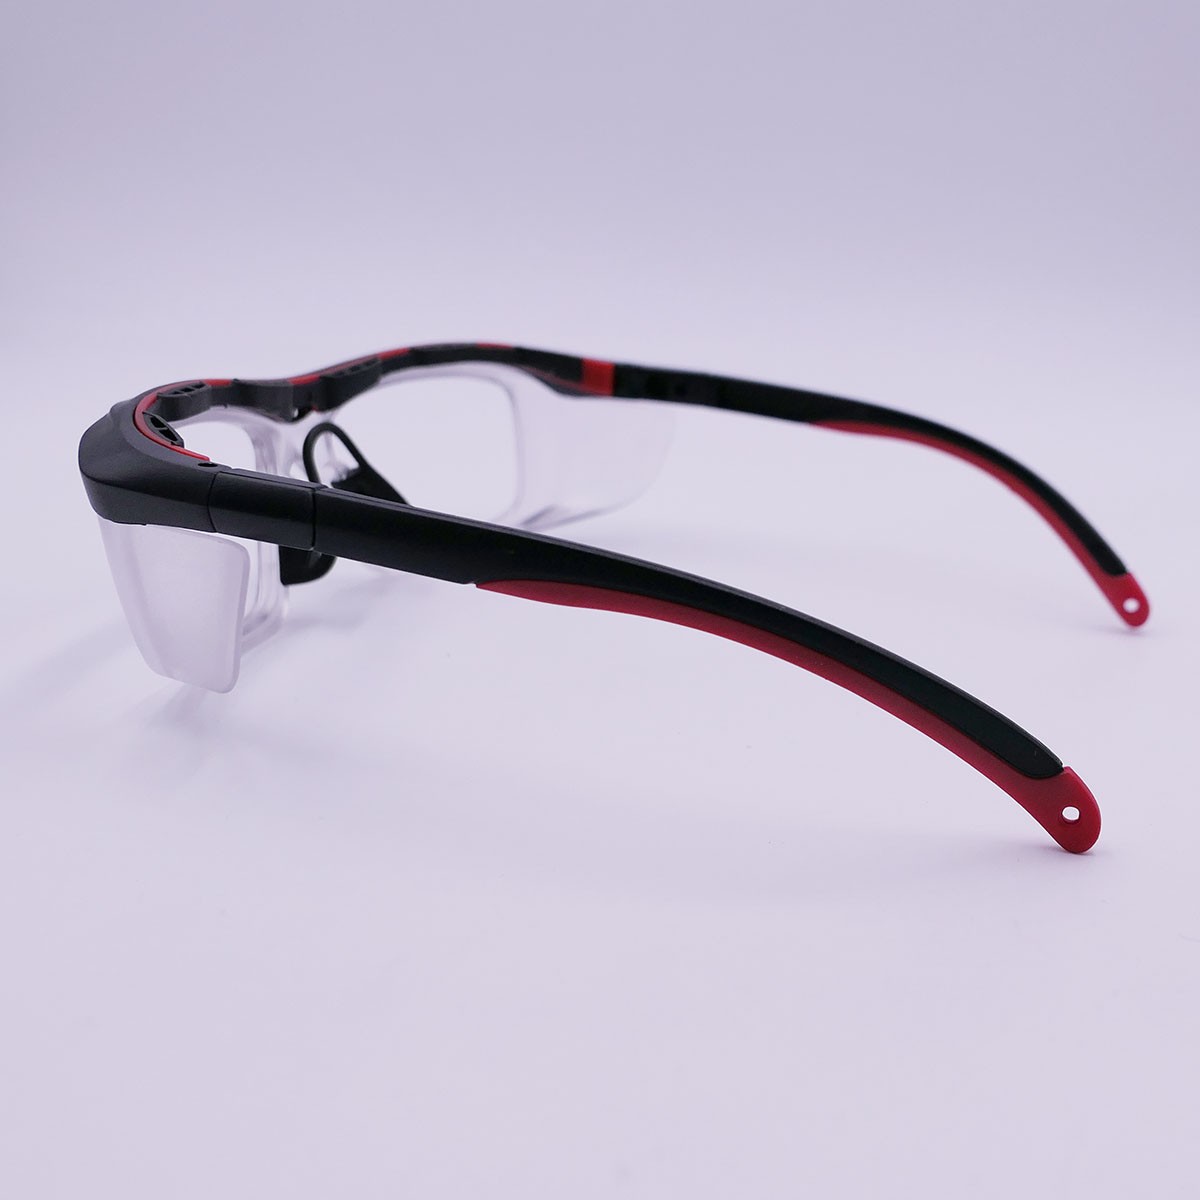 Safety Glasses- Replacement lens Safety Glasses, Arm Angle Adjusted